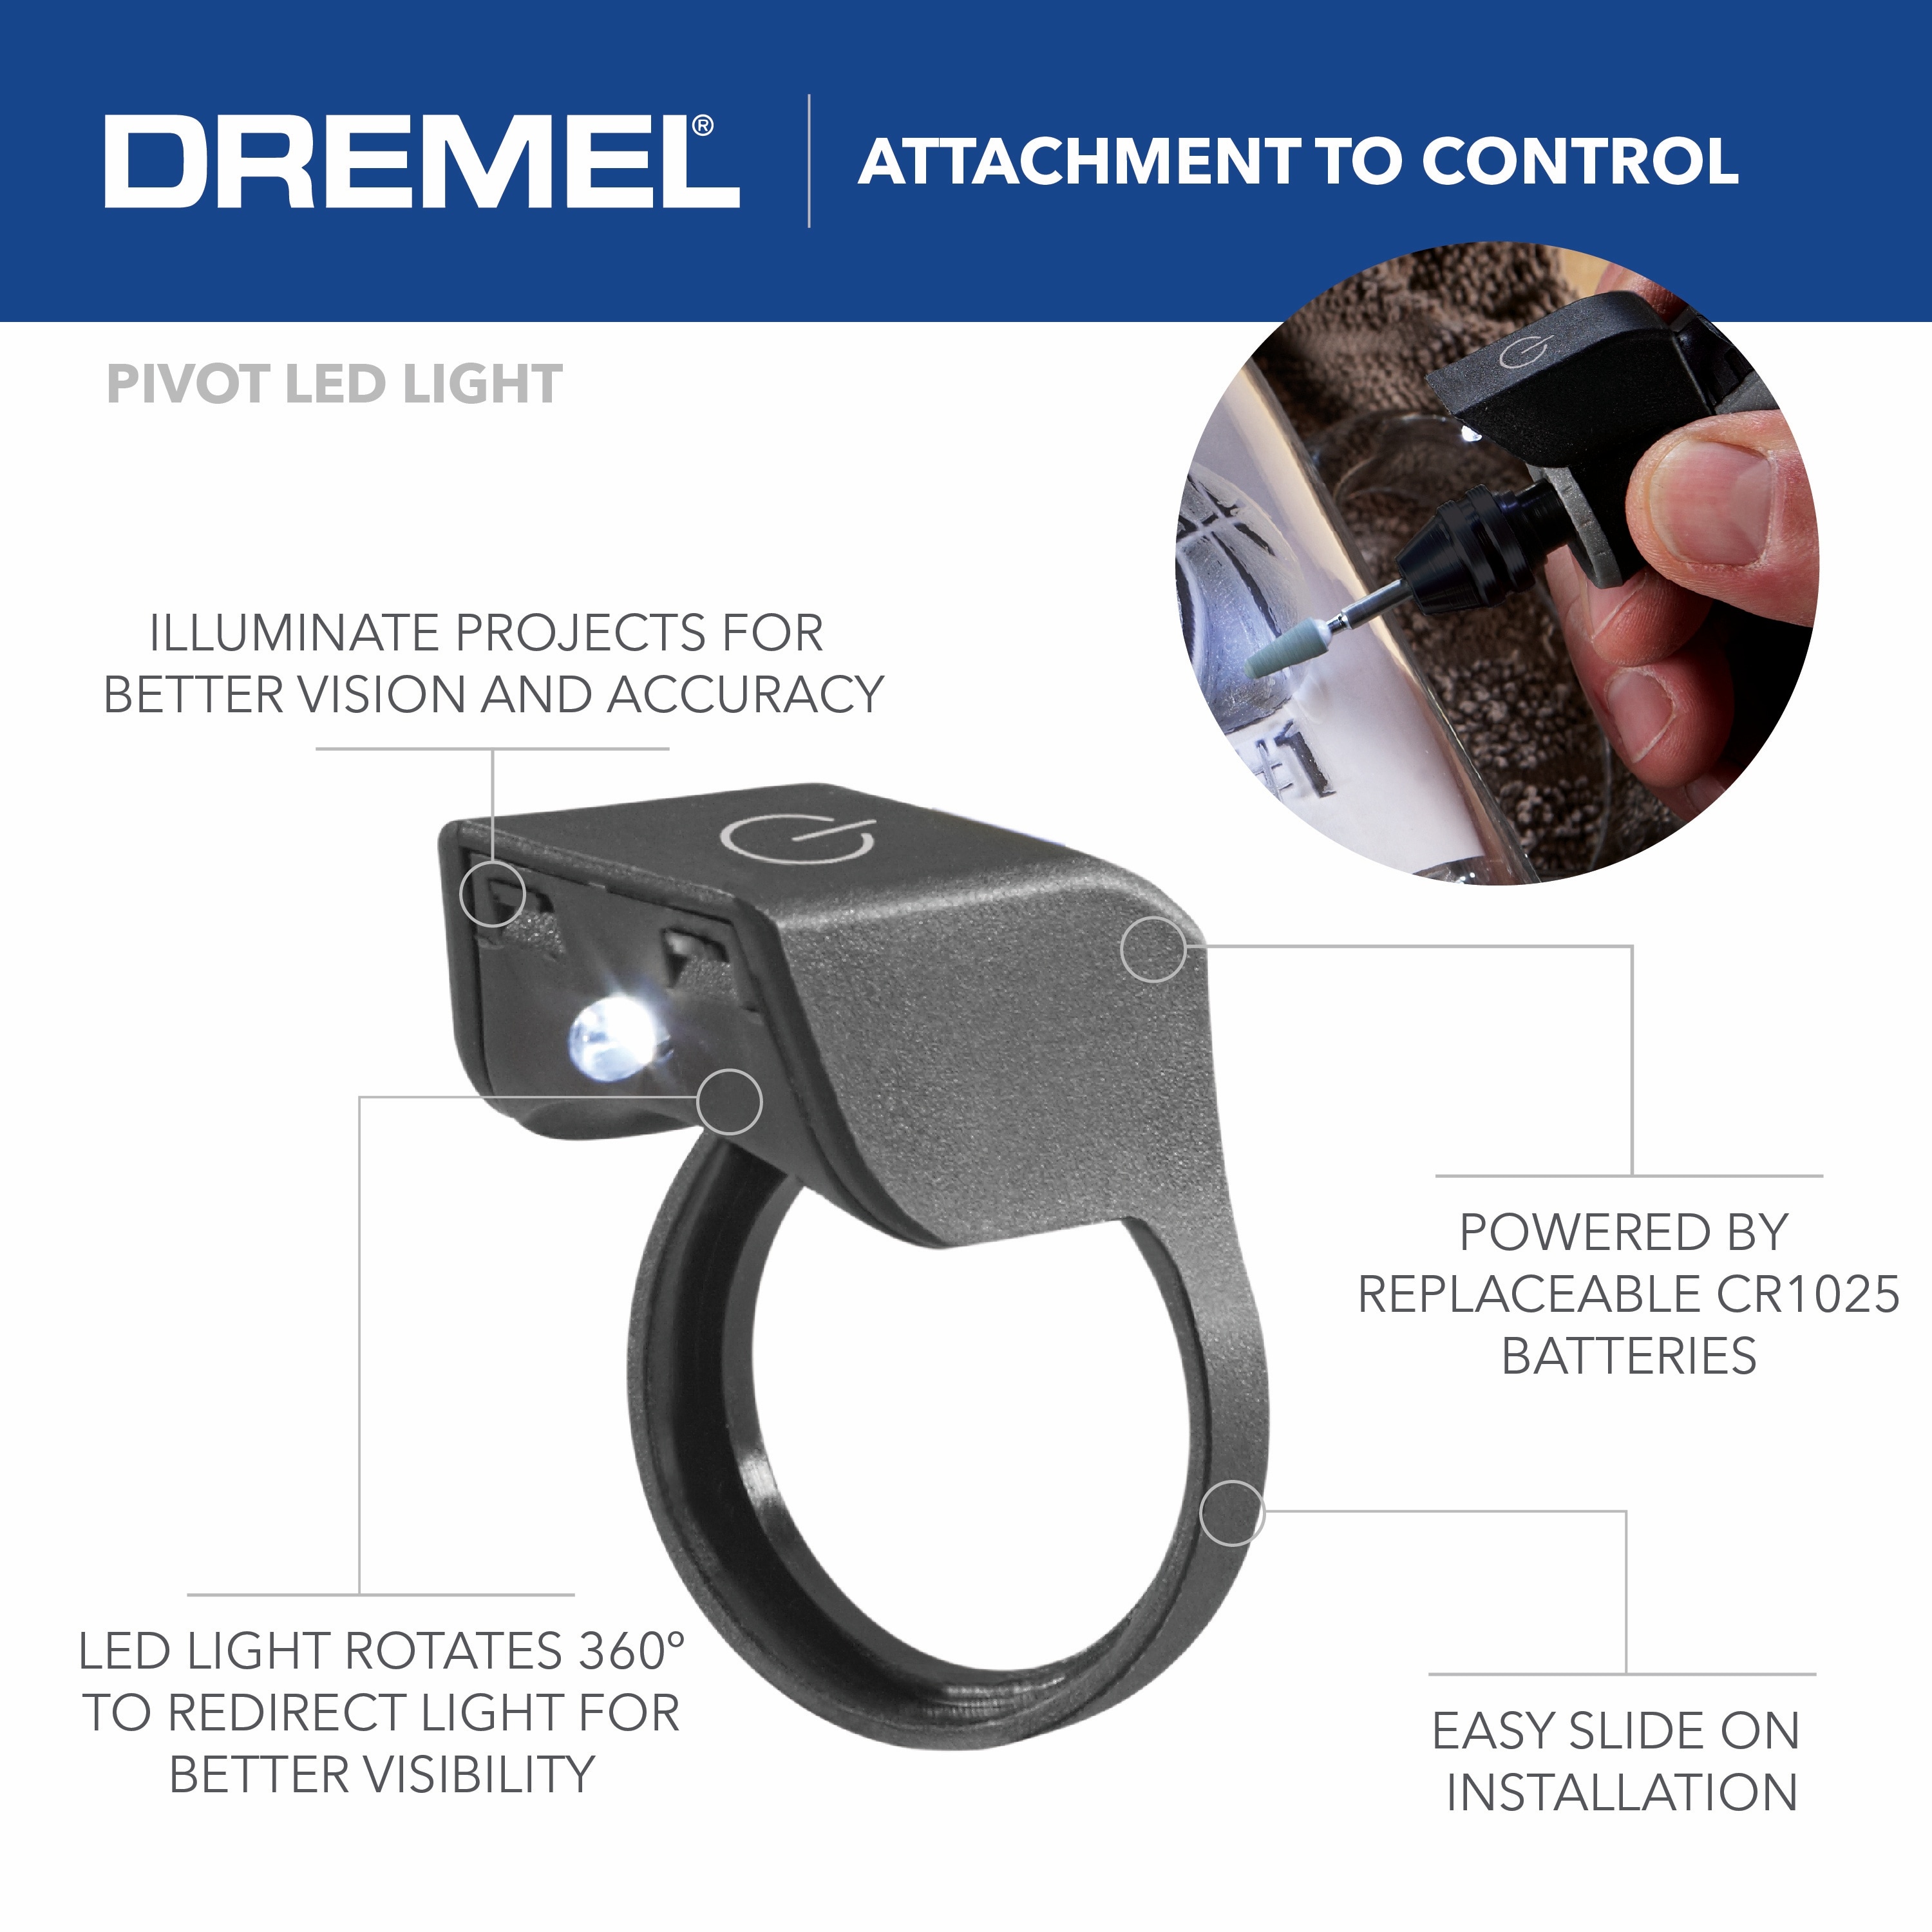 Dremel 4300-3/45 Multifunction Tool Incl. Accessories, Incl. Case